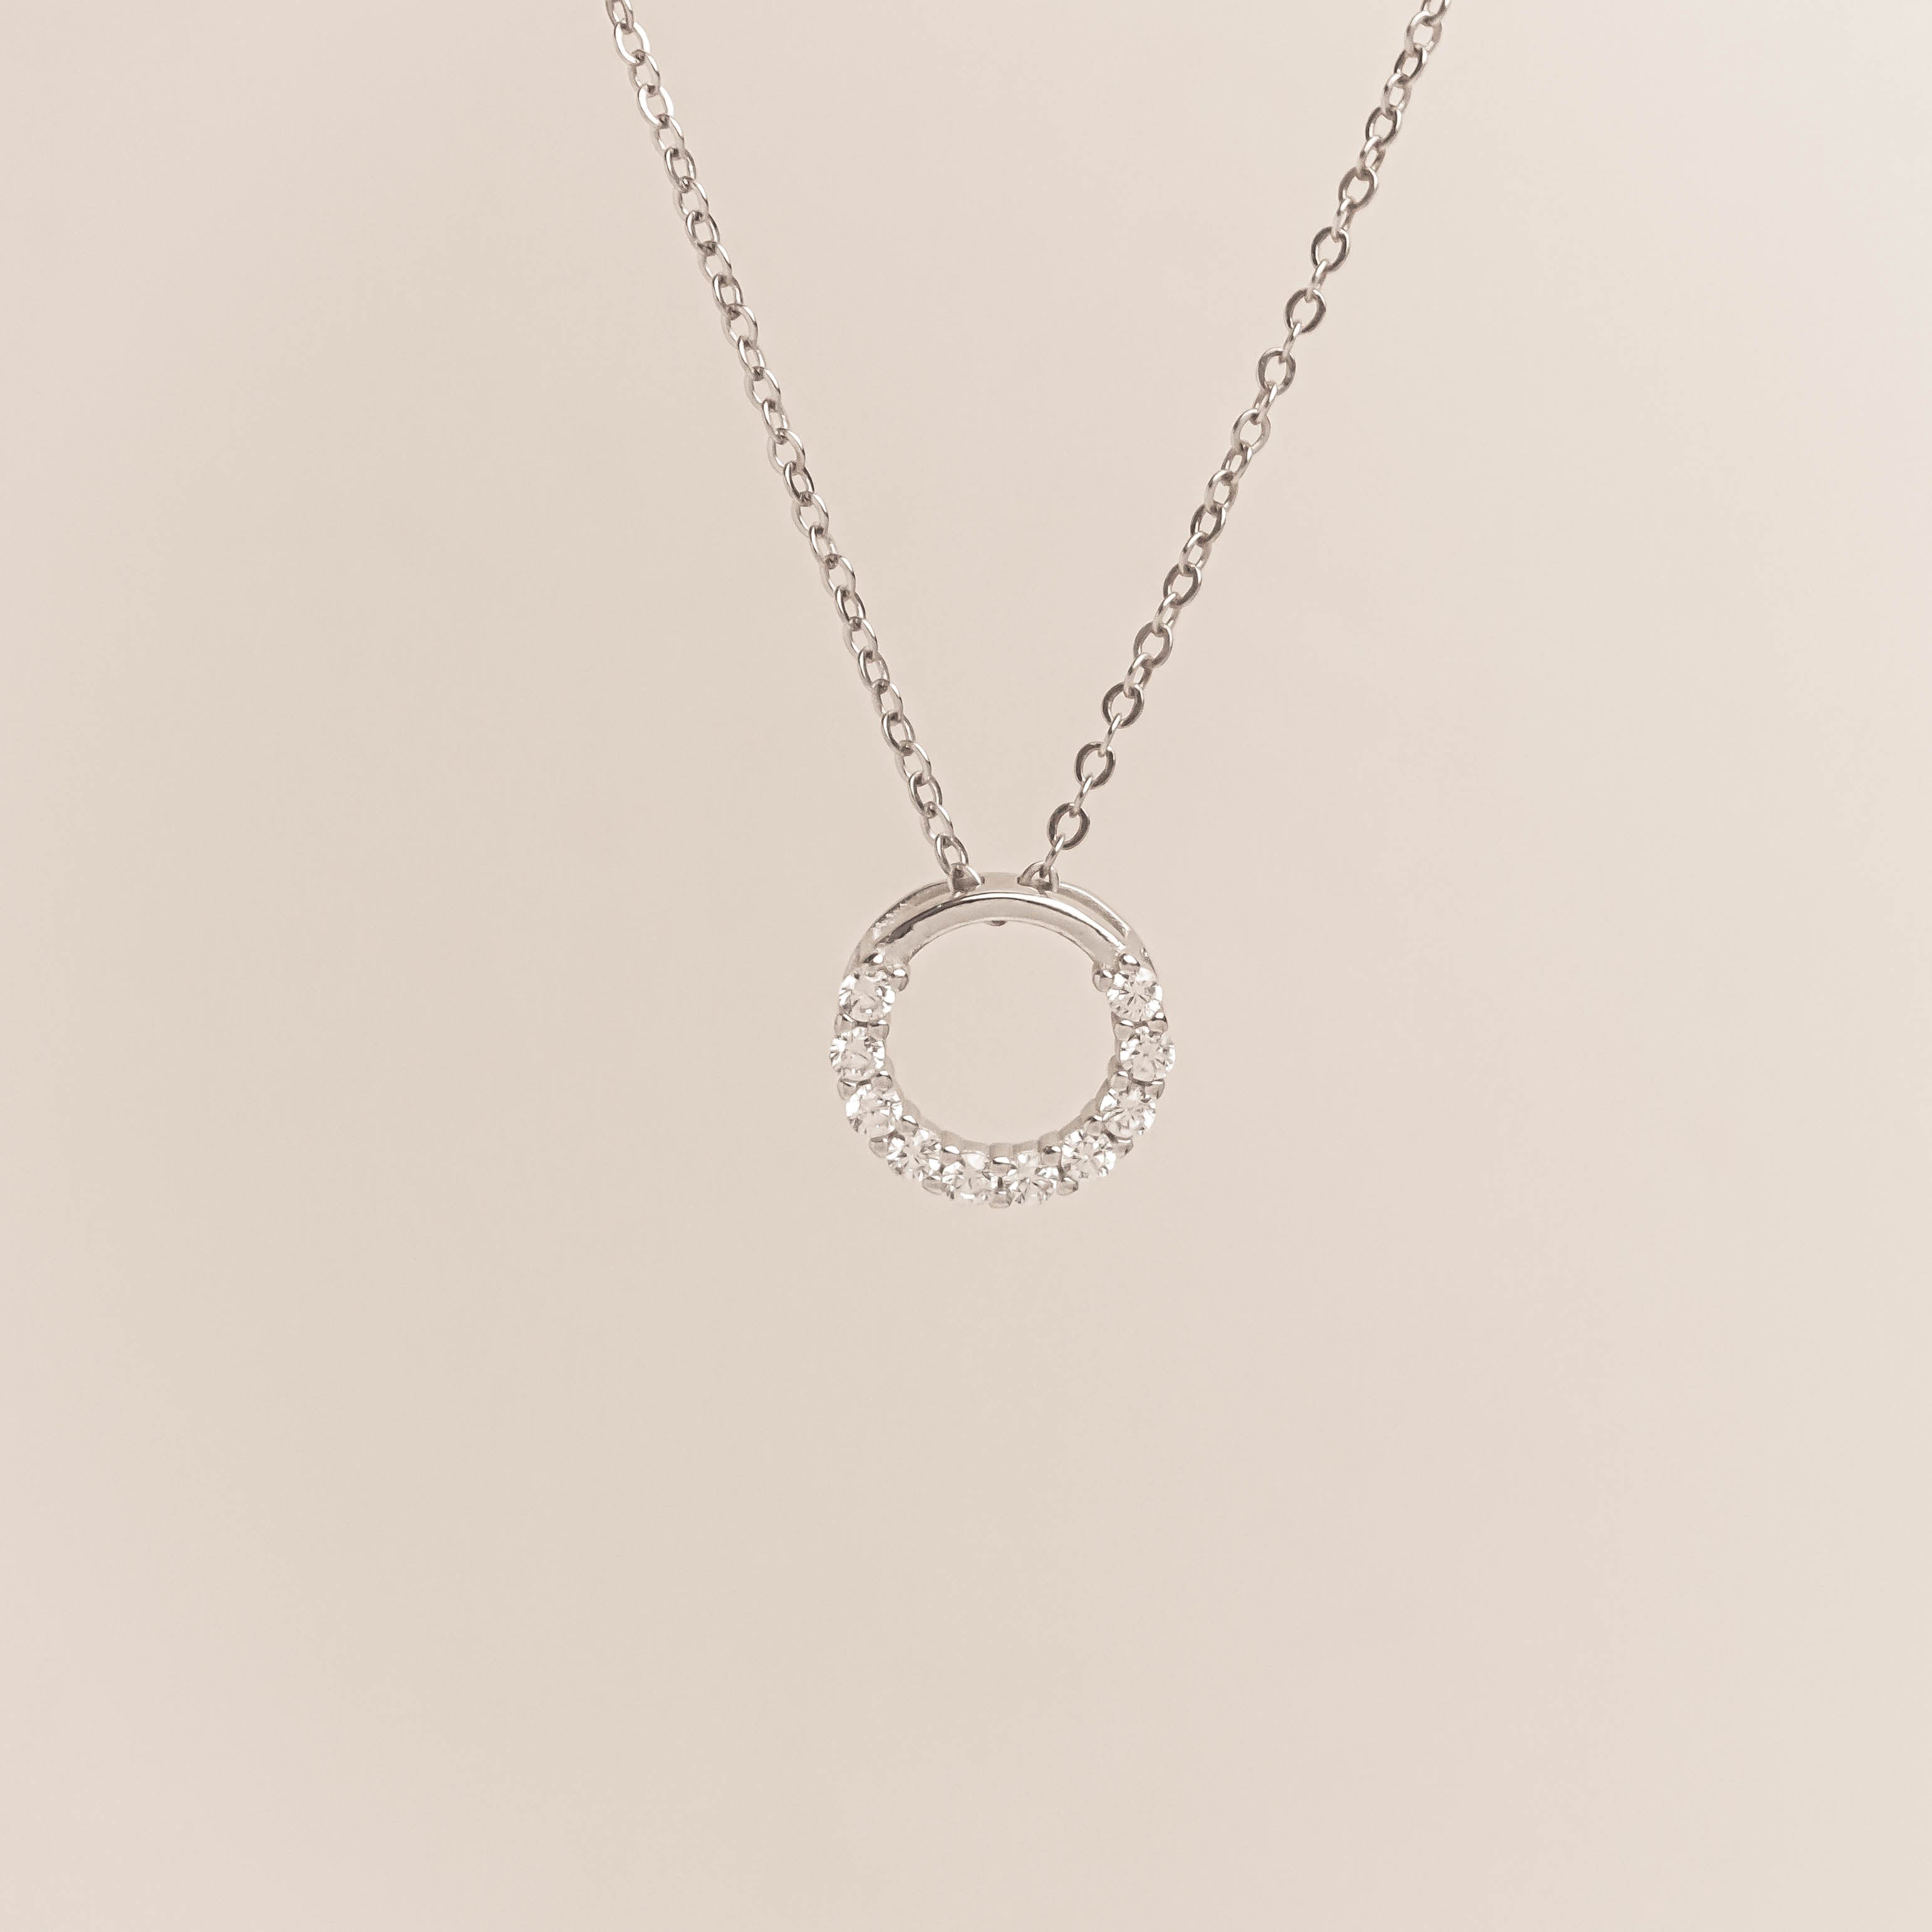 Shiny Wreath Necklace in 18K White Gold Plated